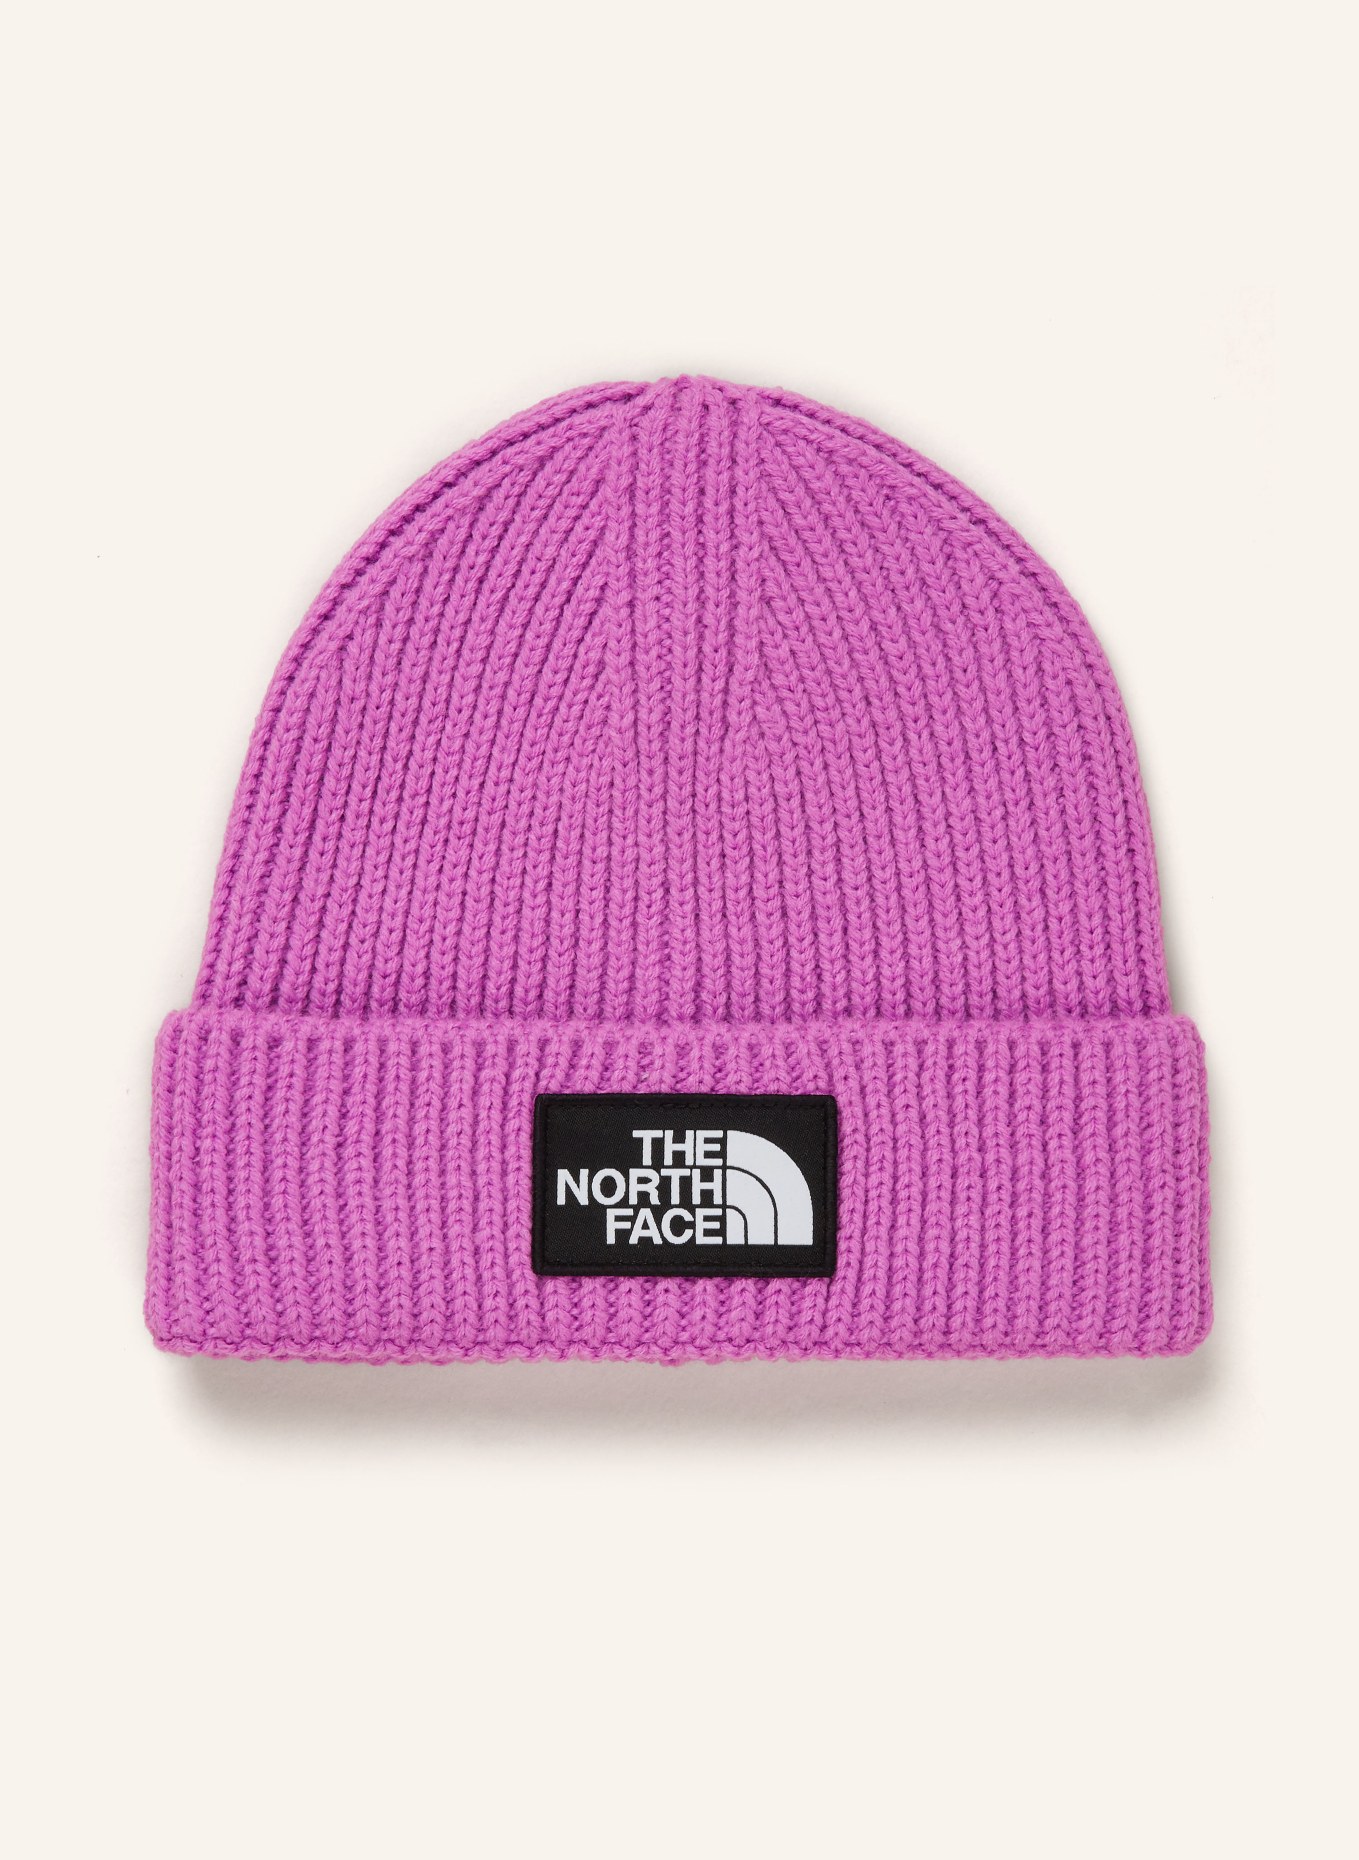 THE NORTH FACE Beanie, Color: NEON PURPLE (Image 1)